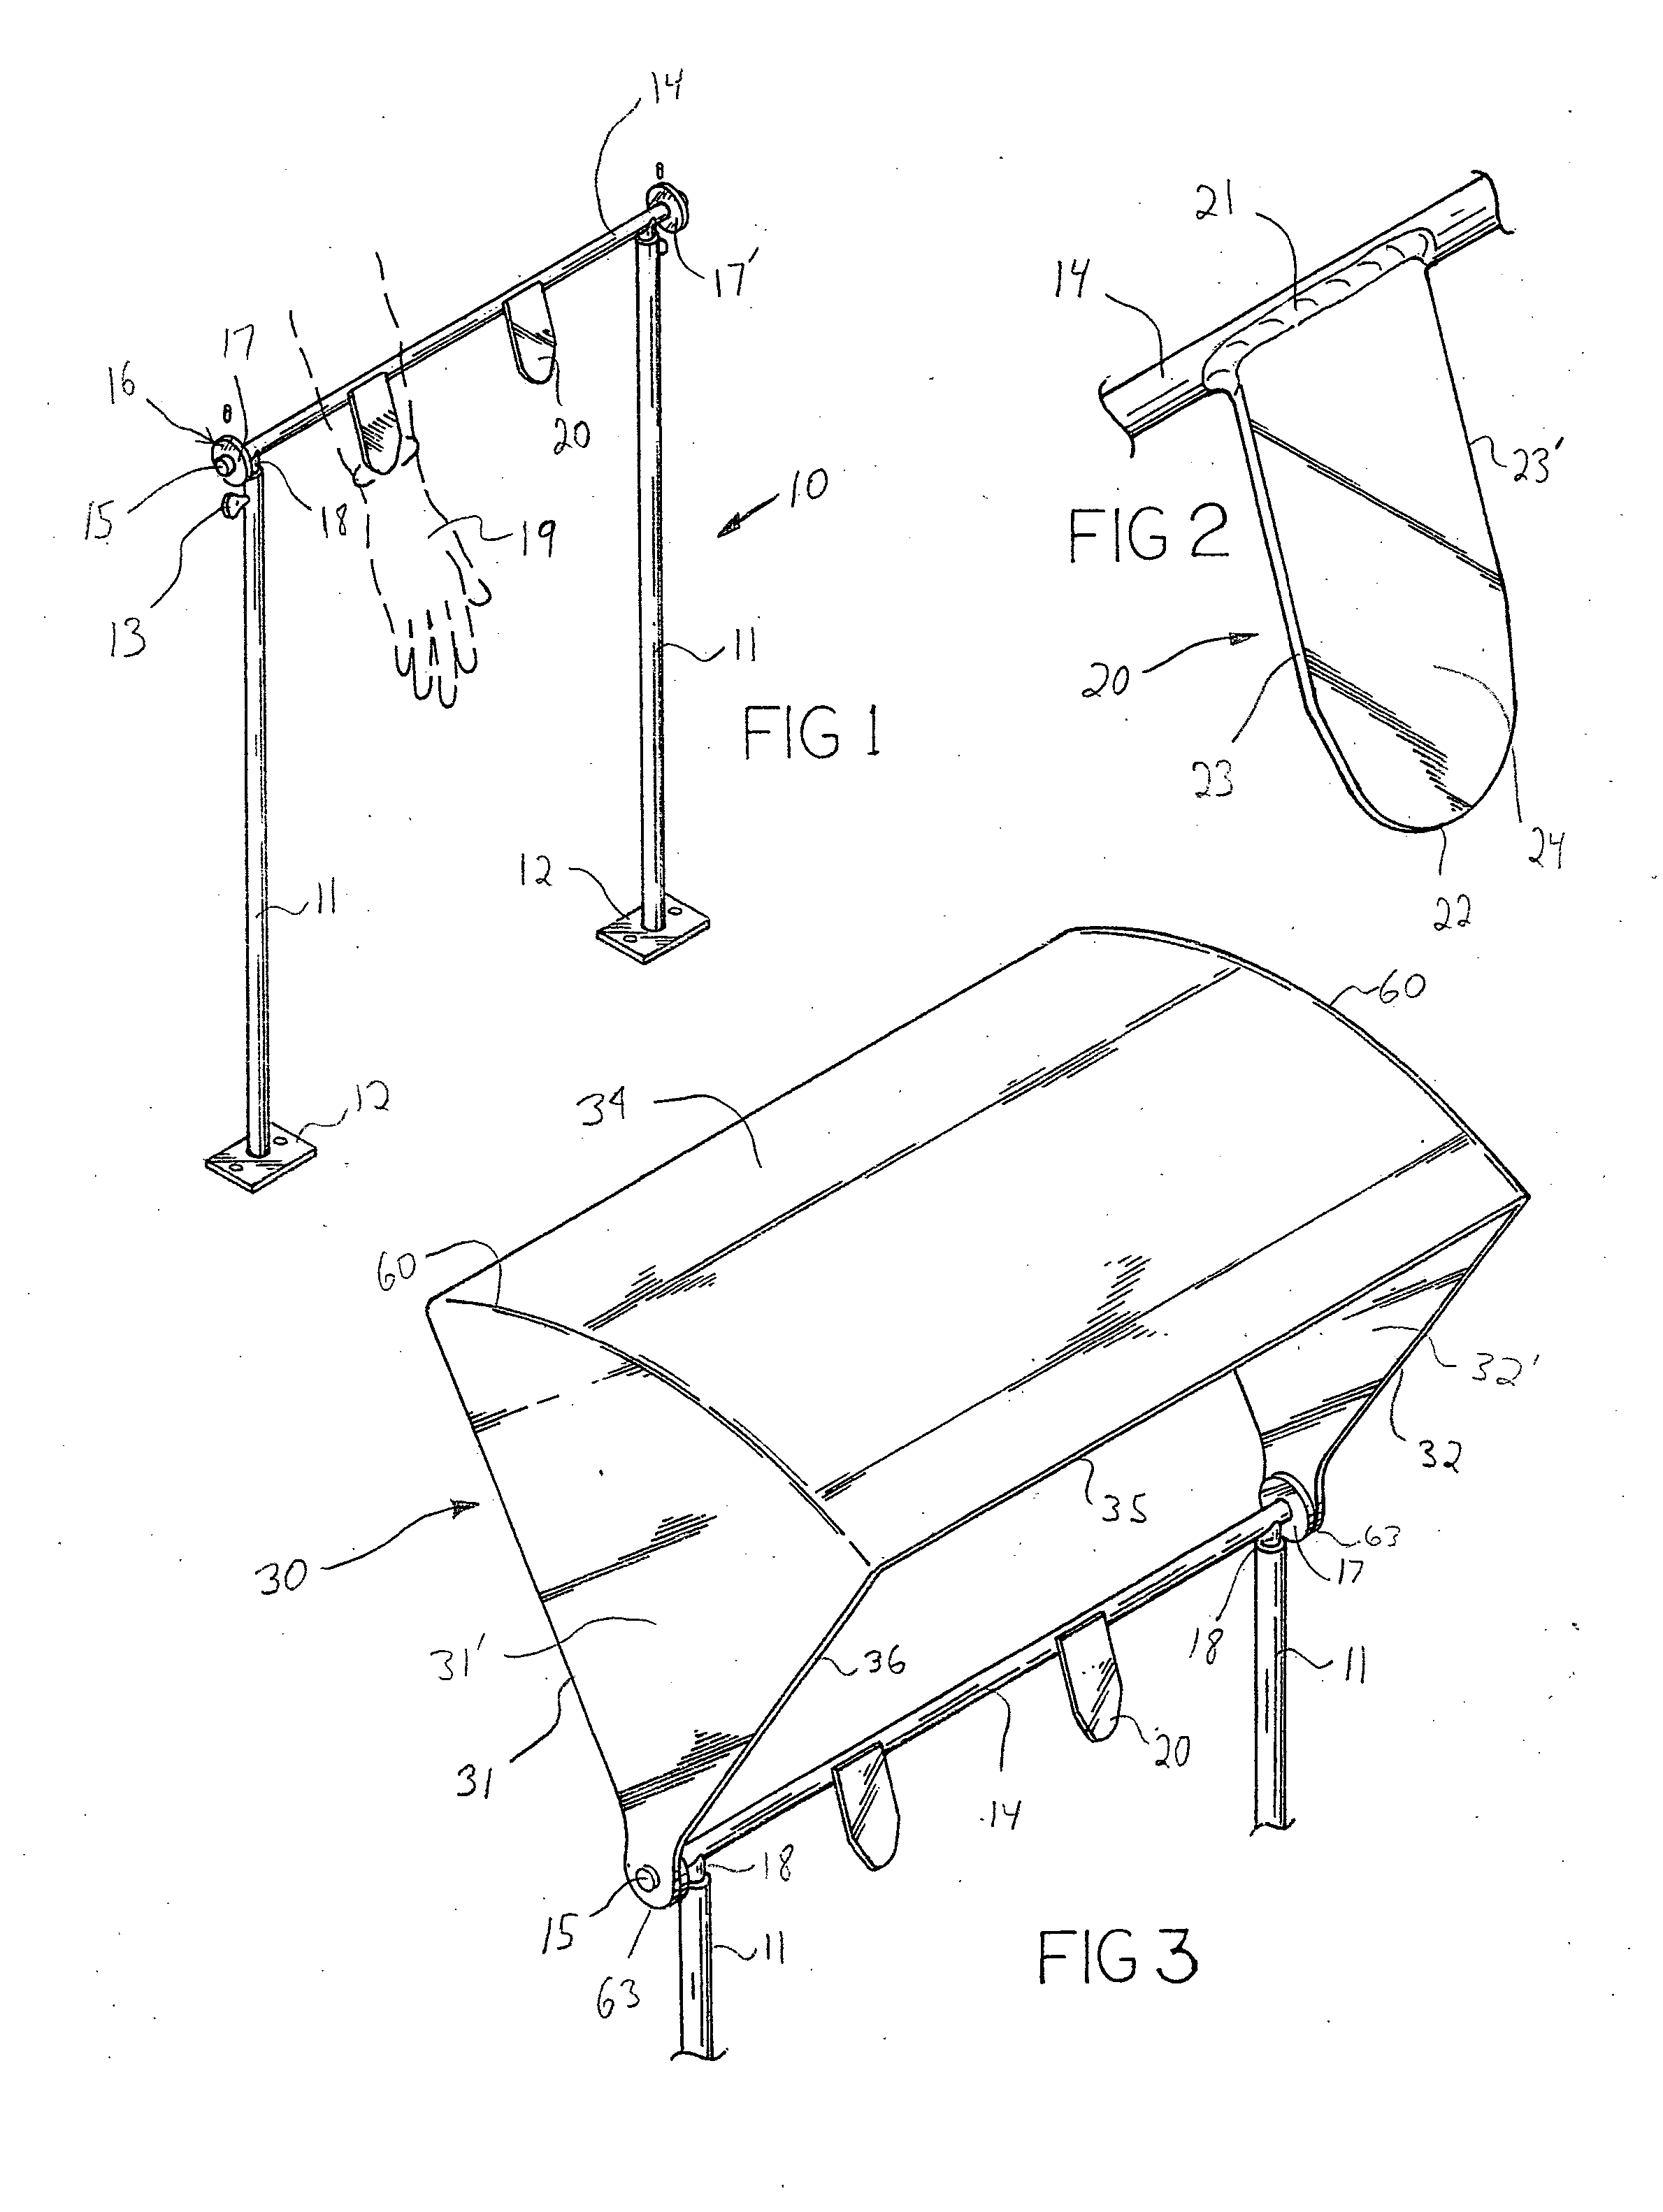 Fully-adjustable glove removal apparatus